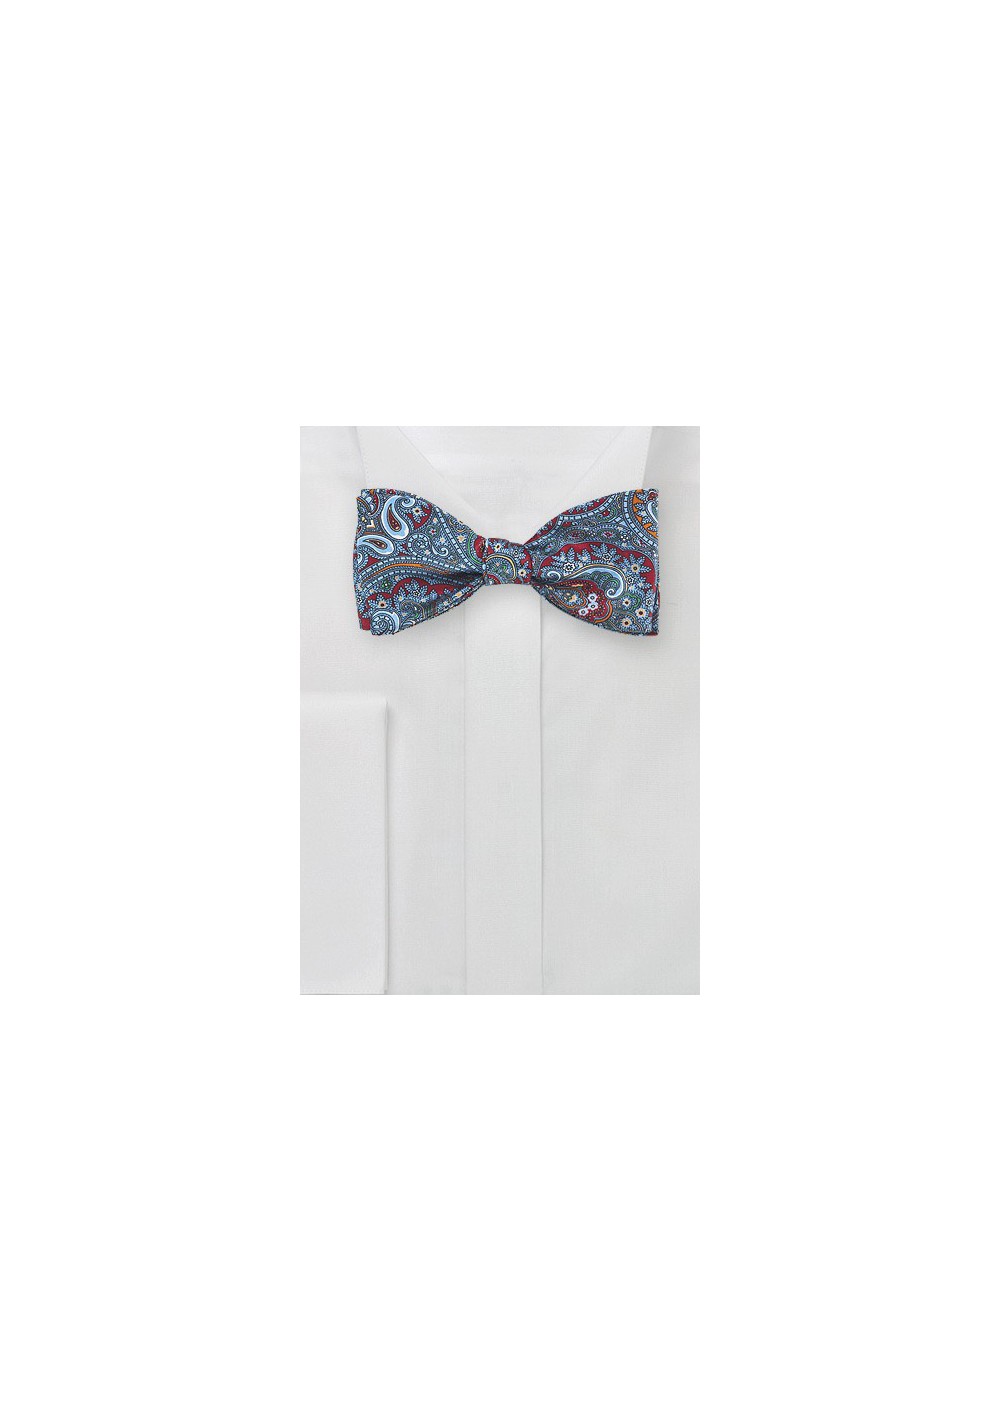 Moroccan Paisley Bow tie in Red and Blue